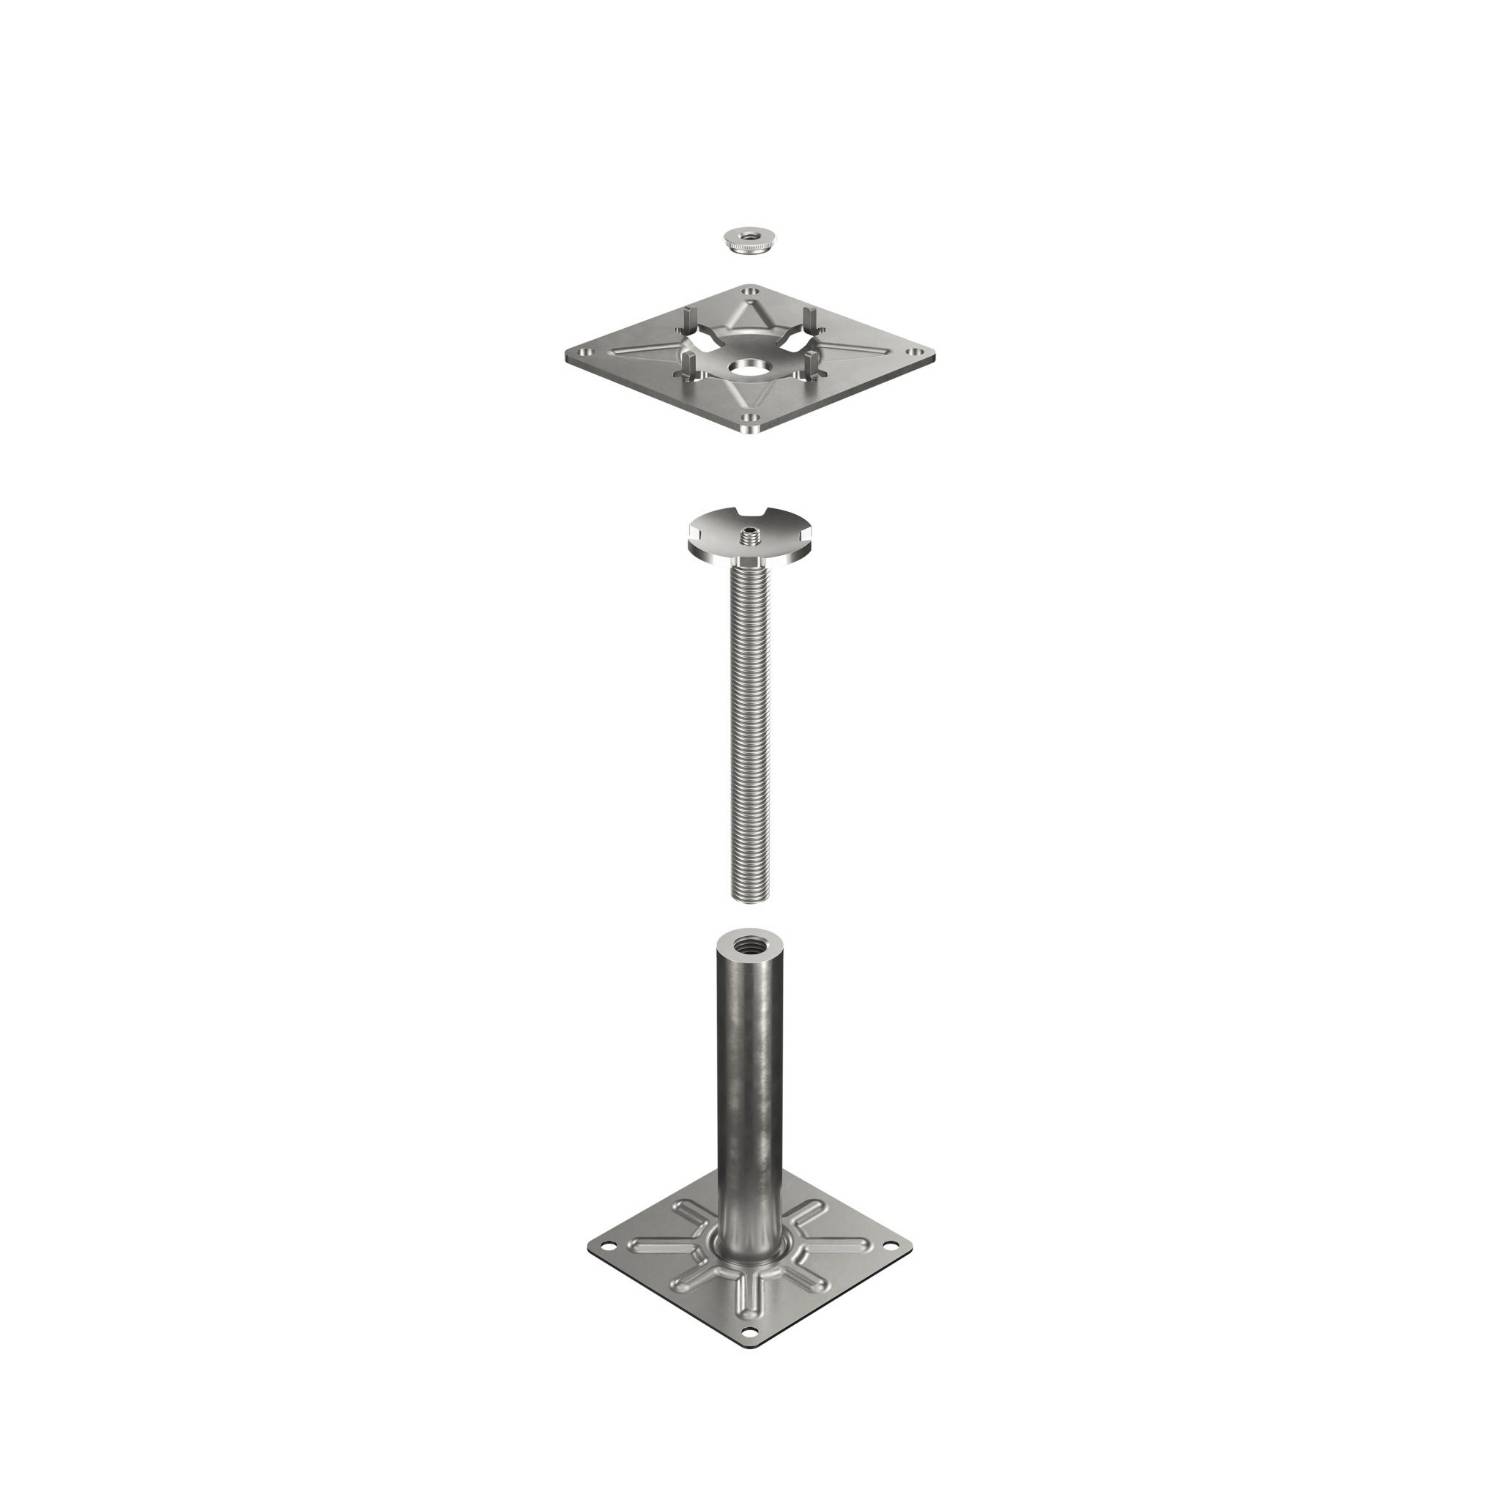 Harmer Modulock Non-Combustible Self Levelling Support Pedestals - Paving